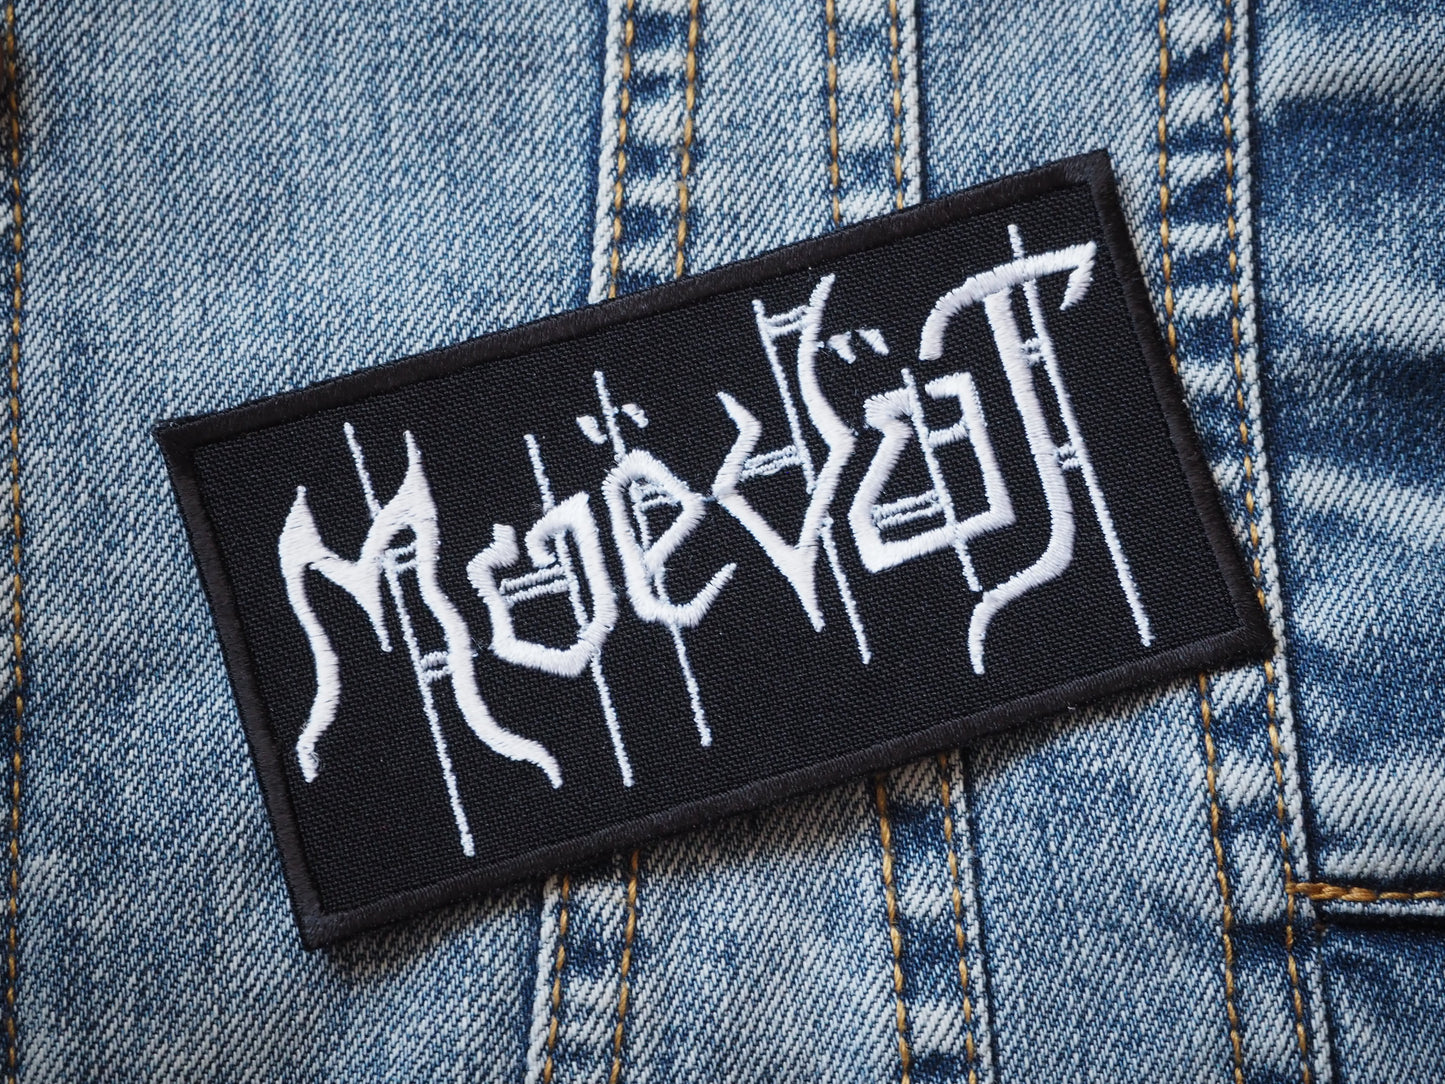 Moevot Black Metal Embroidered Patch